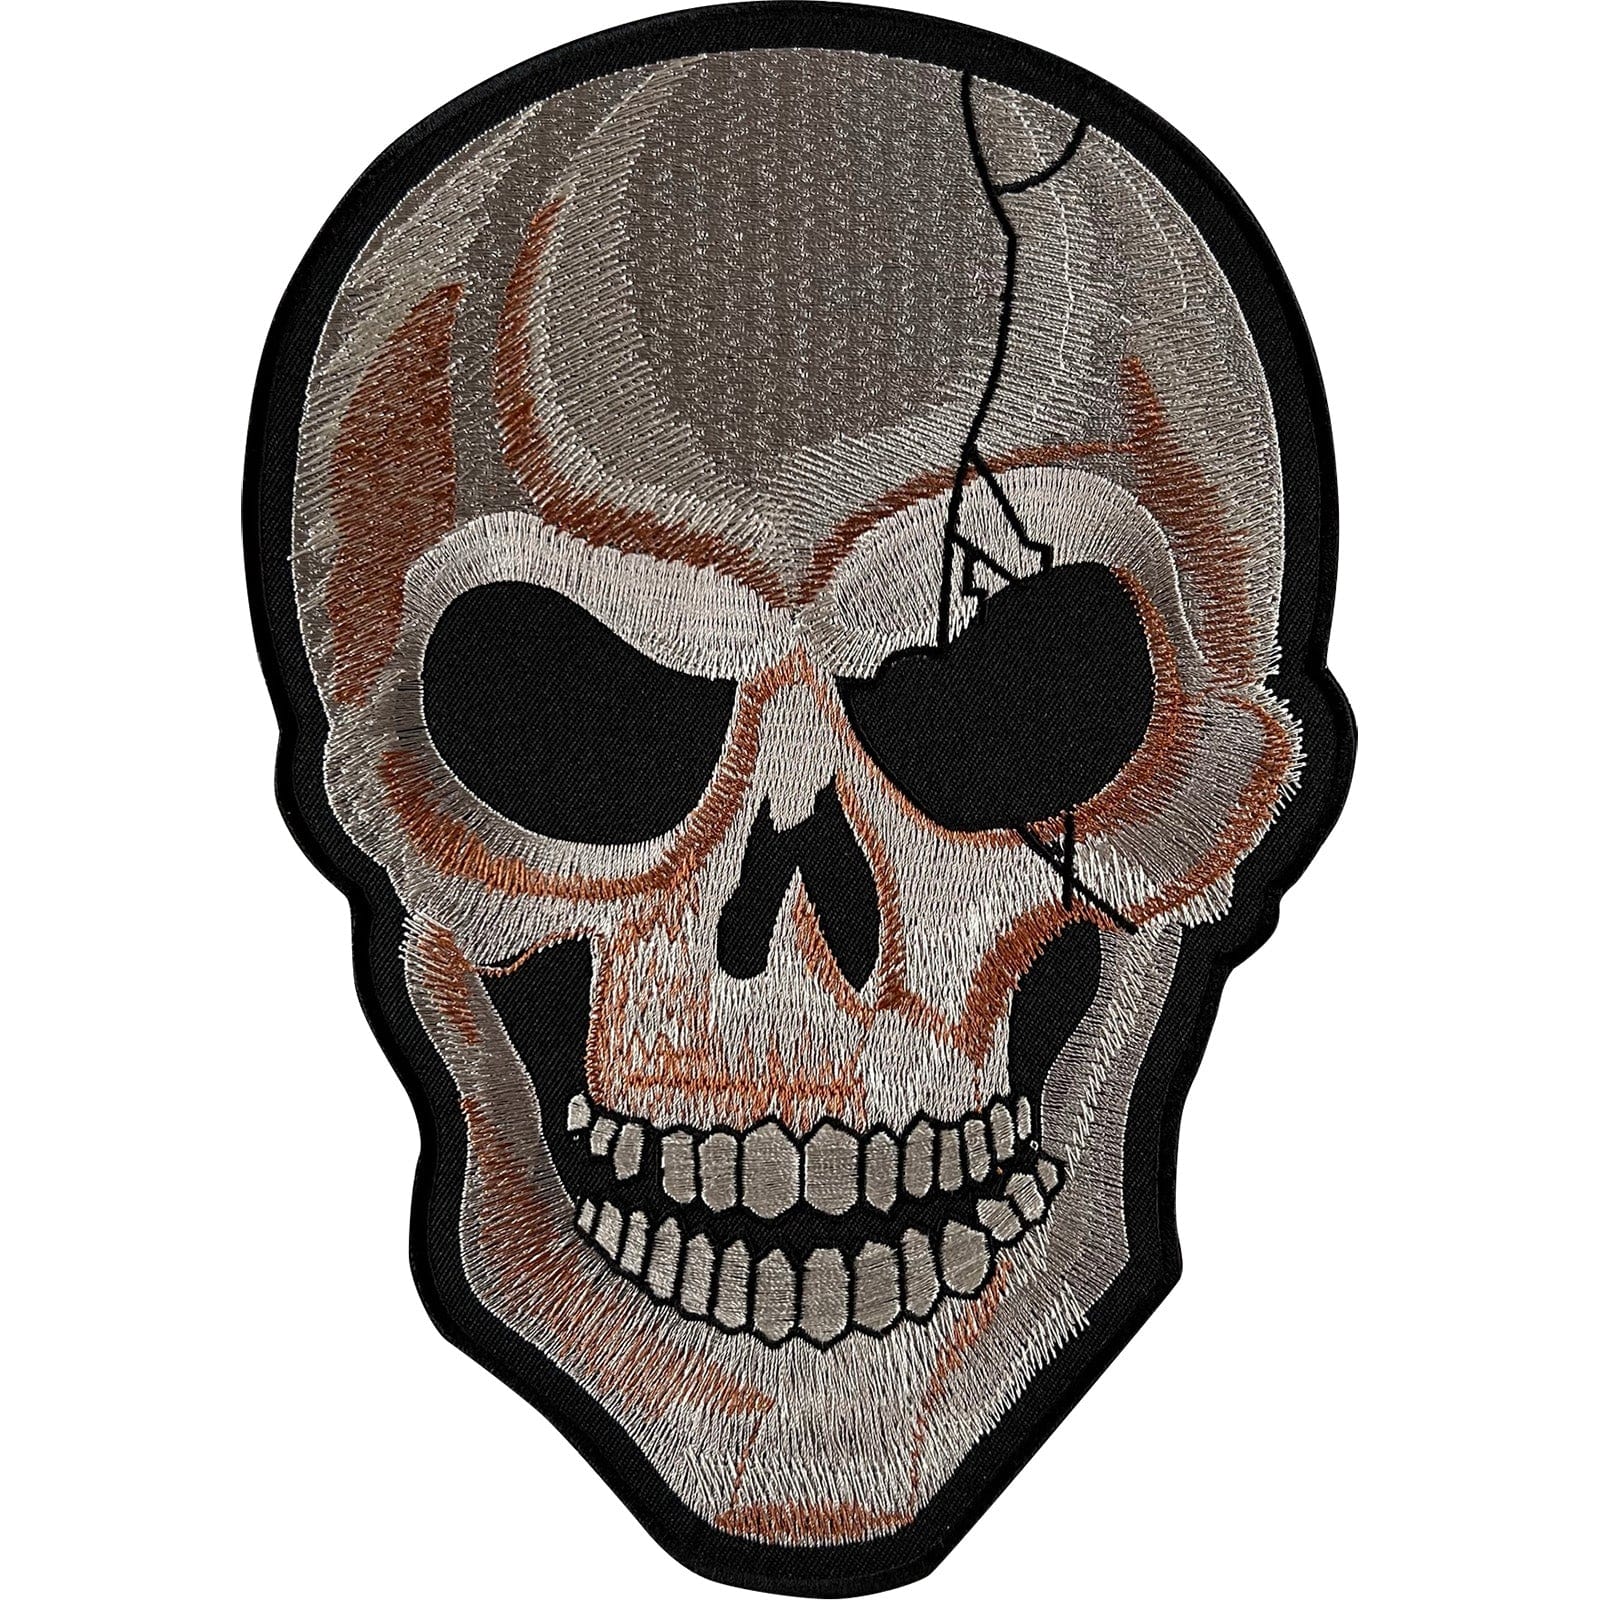 Big Skull Patch Iron Sew On Clothes Jacket Coat T Shirt Large Embroidered Badge